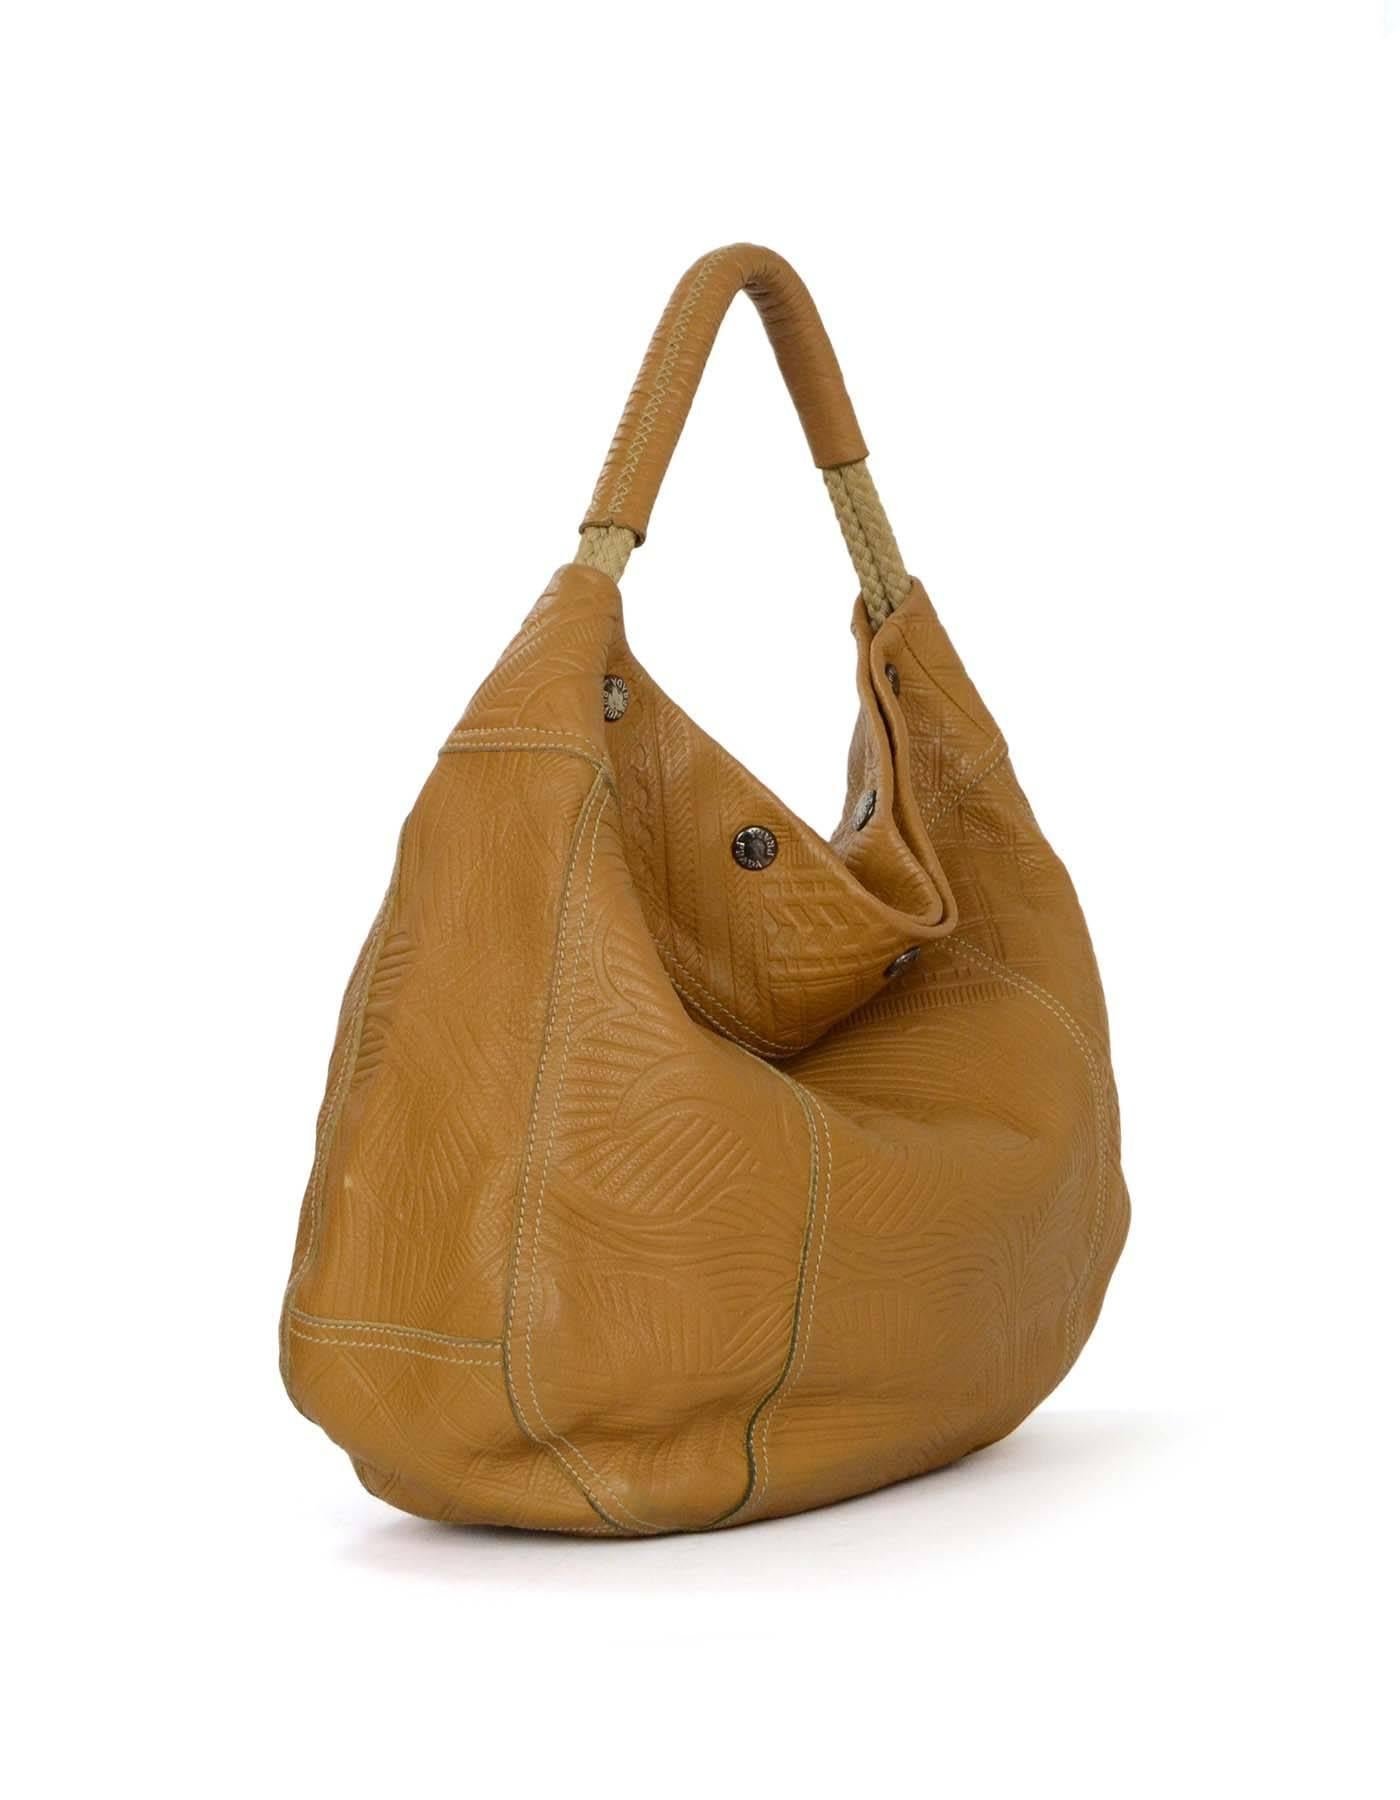 Prada Tan Embossed Hobo Bag
Features woven rope shoulder straps 

Made In: Italy
Color: Tan
Hardware: Gunmetal
Materials: Leather
Lining: Tan textile
Closure/Opening: Open top with button snap closure
Exterior Pockets: None
Interior